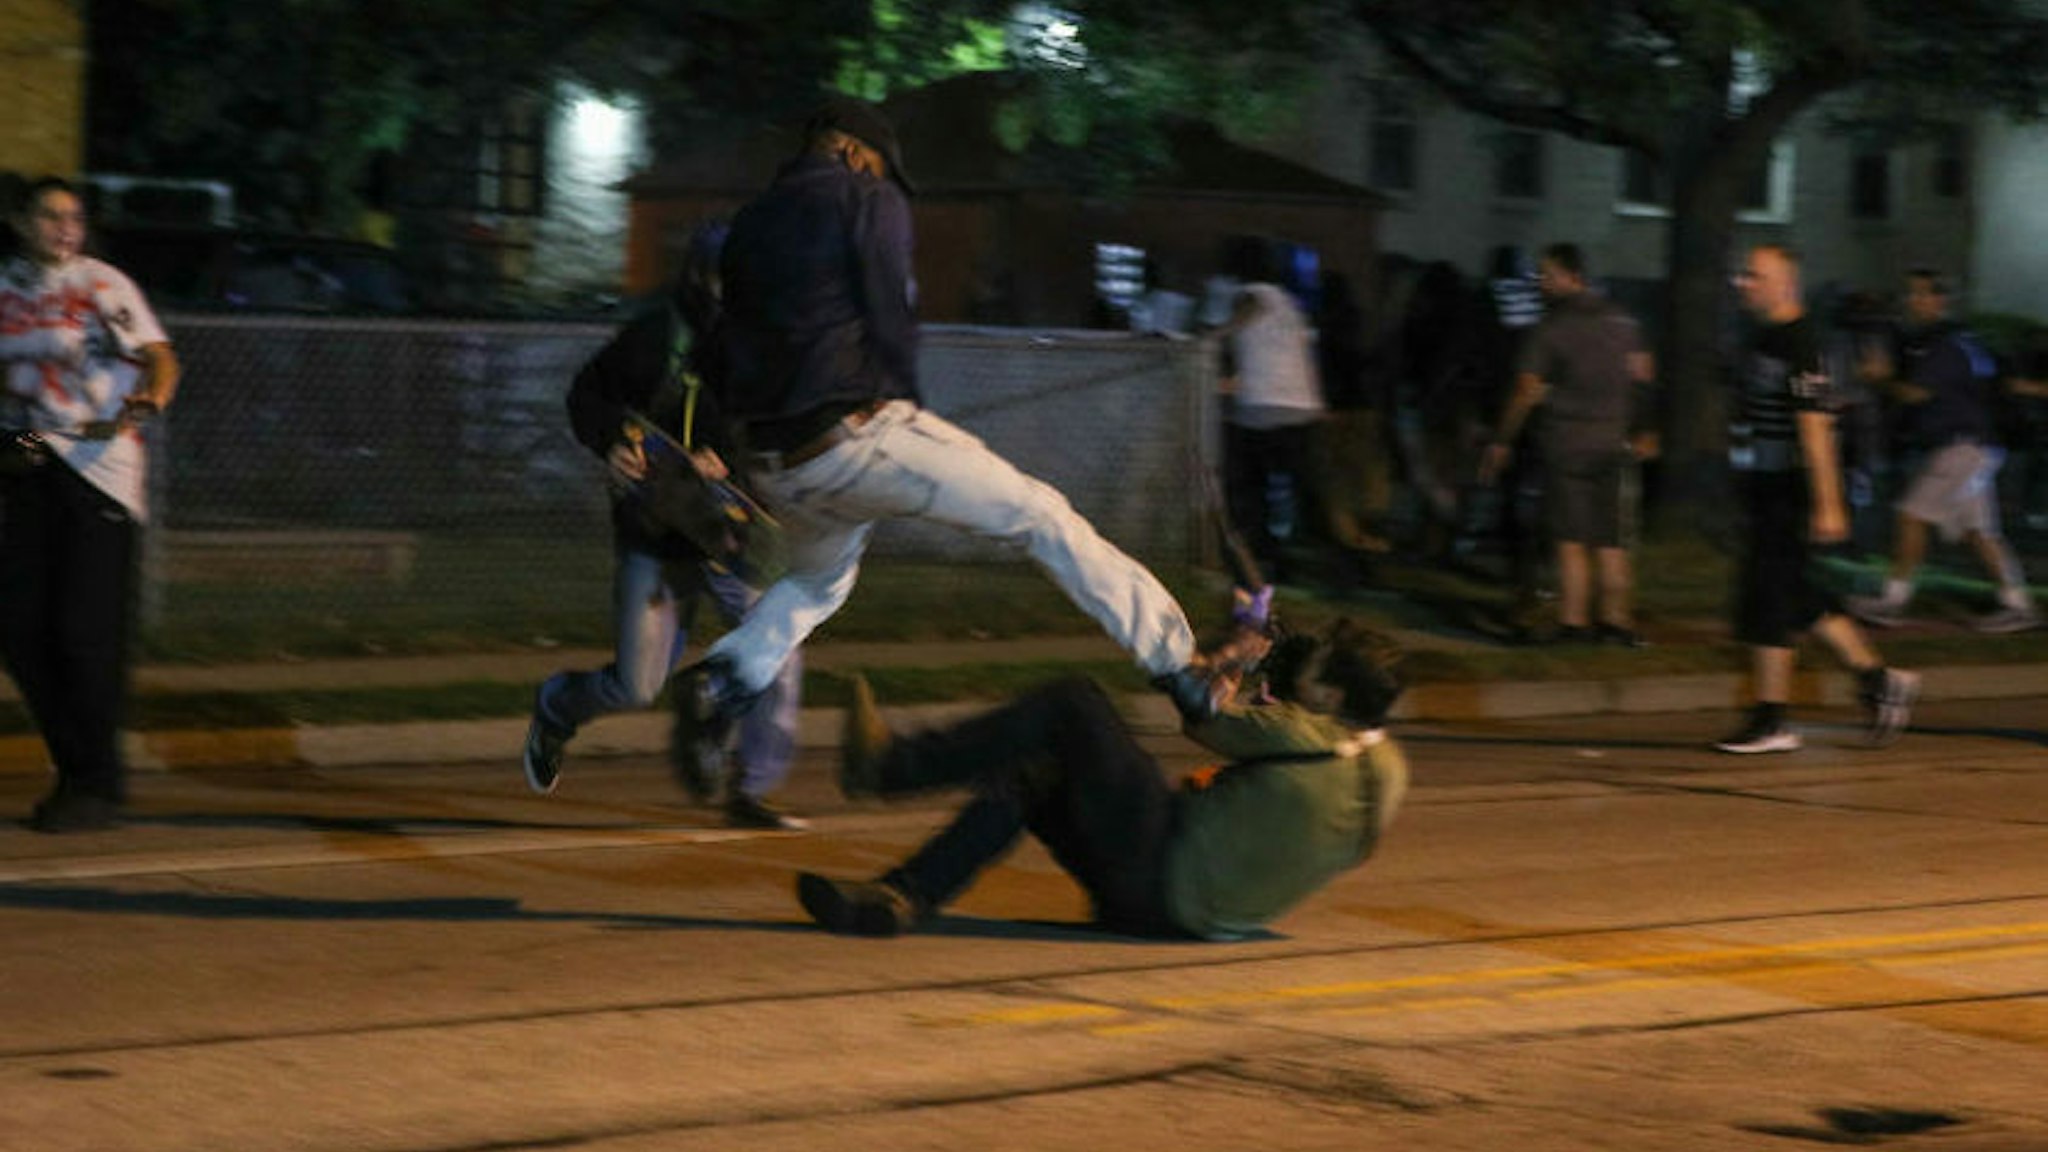 A protester clashes with armed civilian Kyle Rittenhouse during confrontations between protesters and armed civilians, who claimed to protect the streets of Kenosha against the arson, during the third day of protests over the shooting of a black man Jacob Blake by police officer in Wisconsin, United States on August 25, 2020.